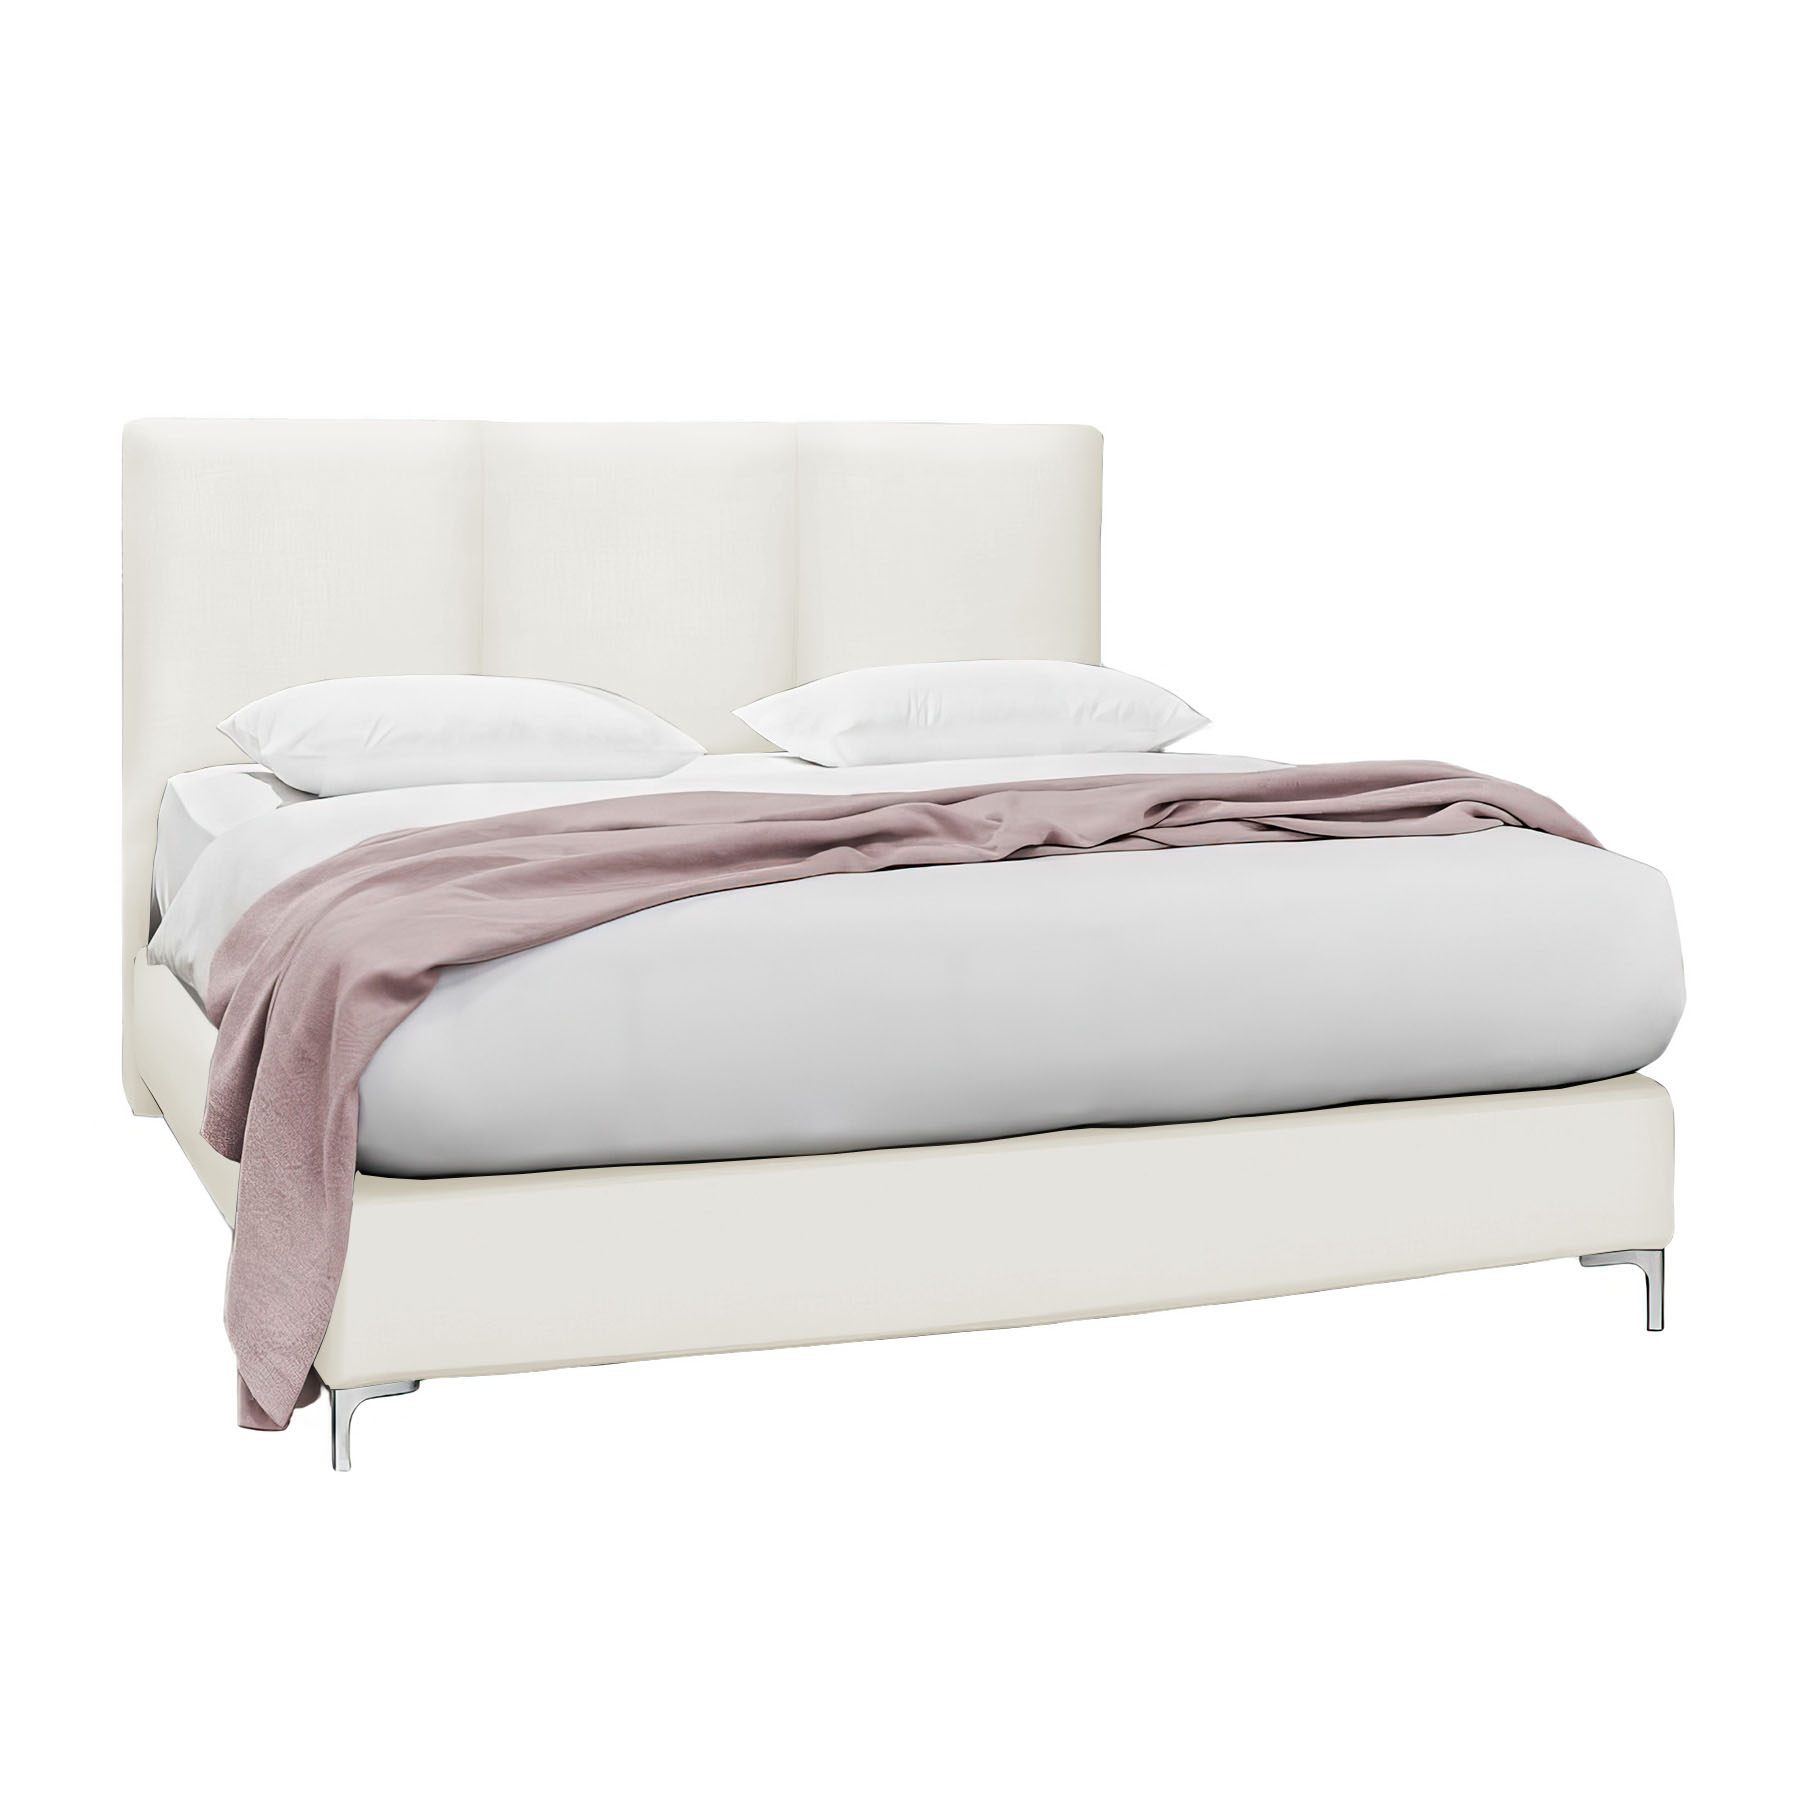 Boxspringbett Kate Select 140/200cm in Hot Madison Wollweiß